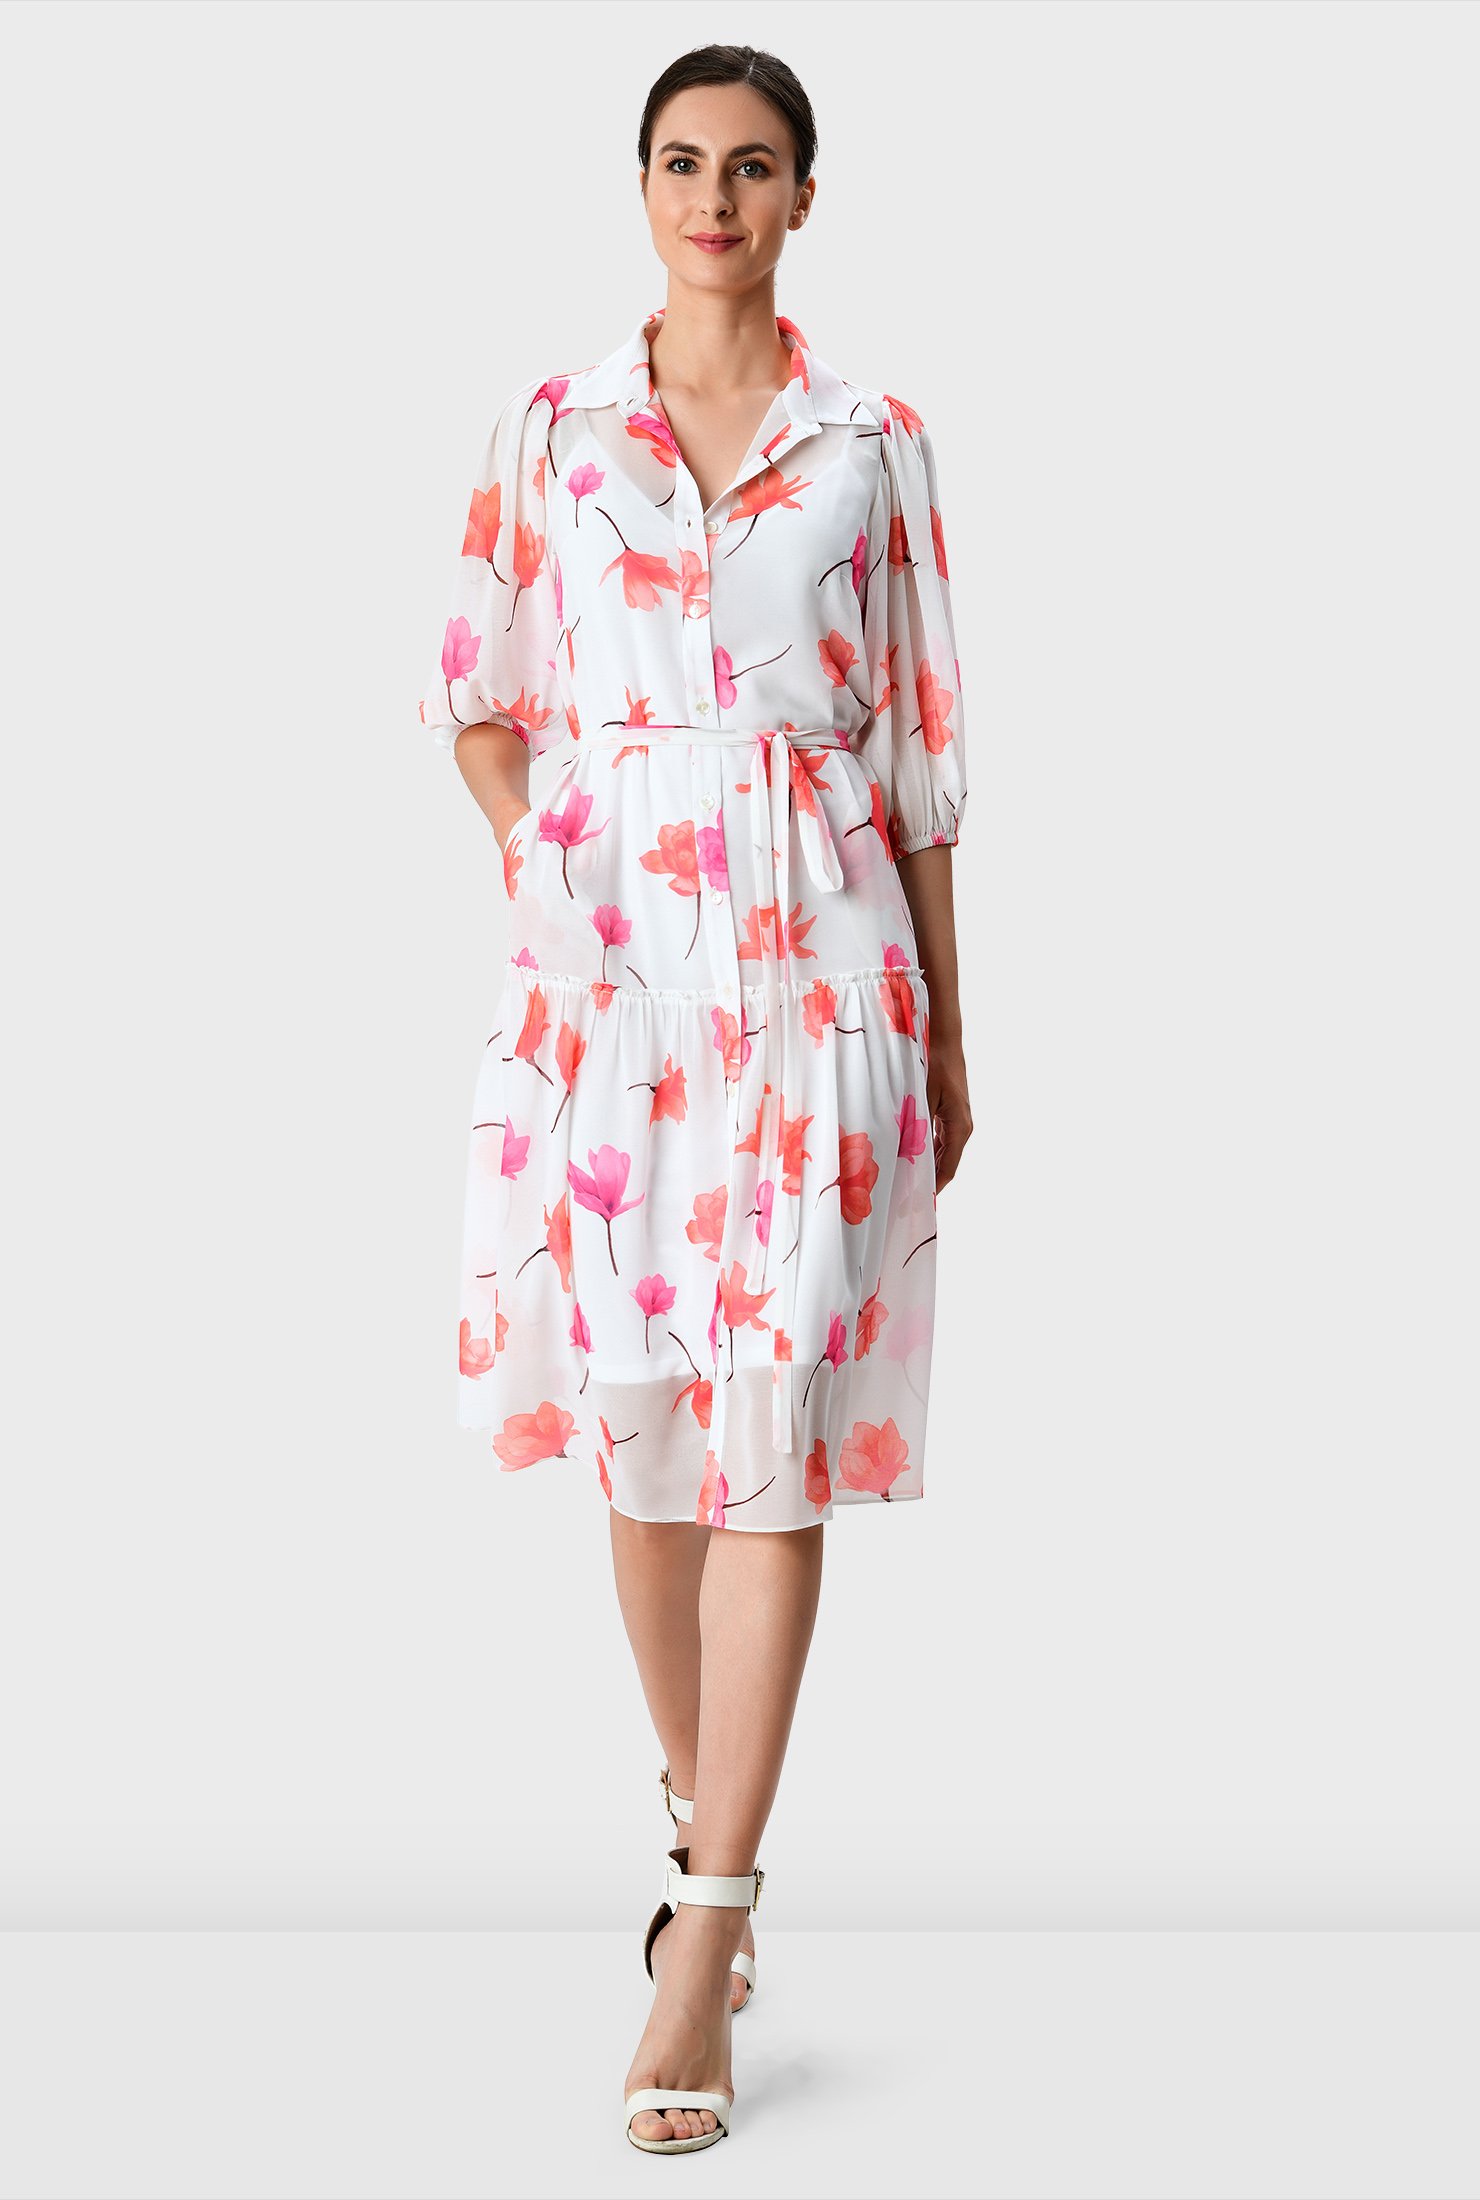 A visual delight, our sheer floral print georgette shirtdress features a drop waist with ruffle frill trim and a breezy flared hem that makes it so much fun to put on.